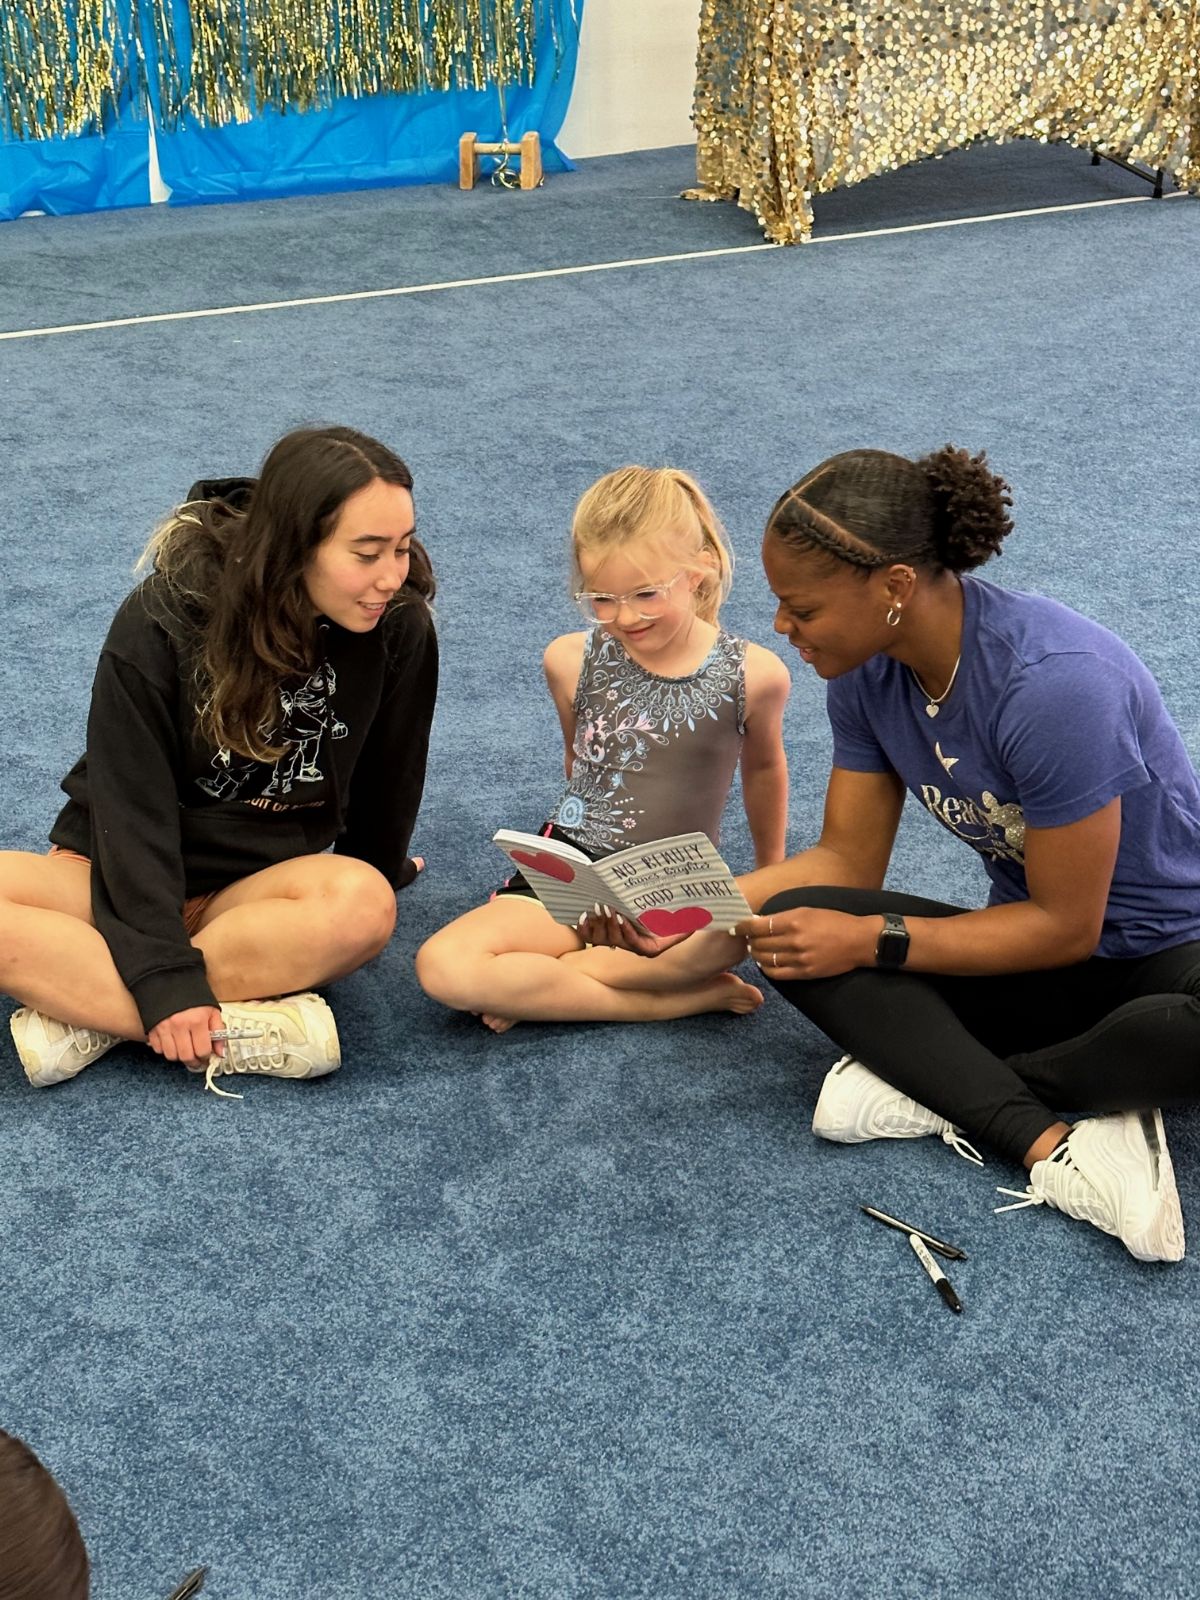 FUNDRAISING ENDS TONIGHT - Set Goals with Katelyn Ohashi & Trinity Thomas + Private Time!